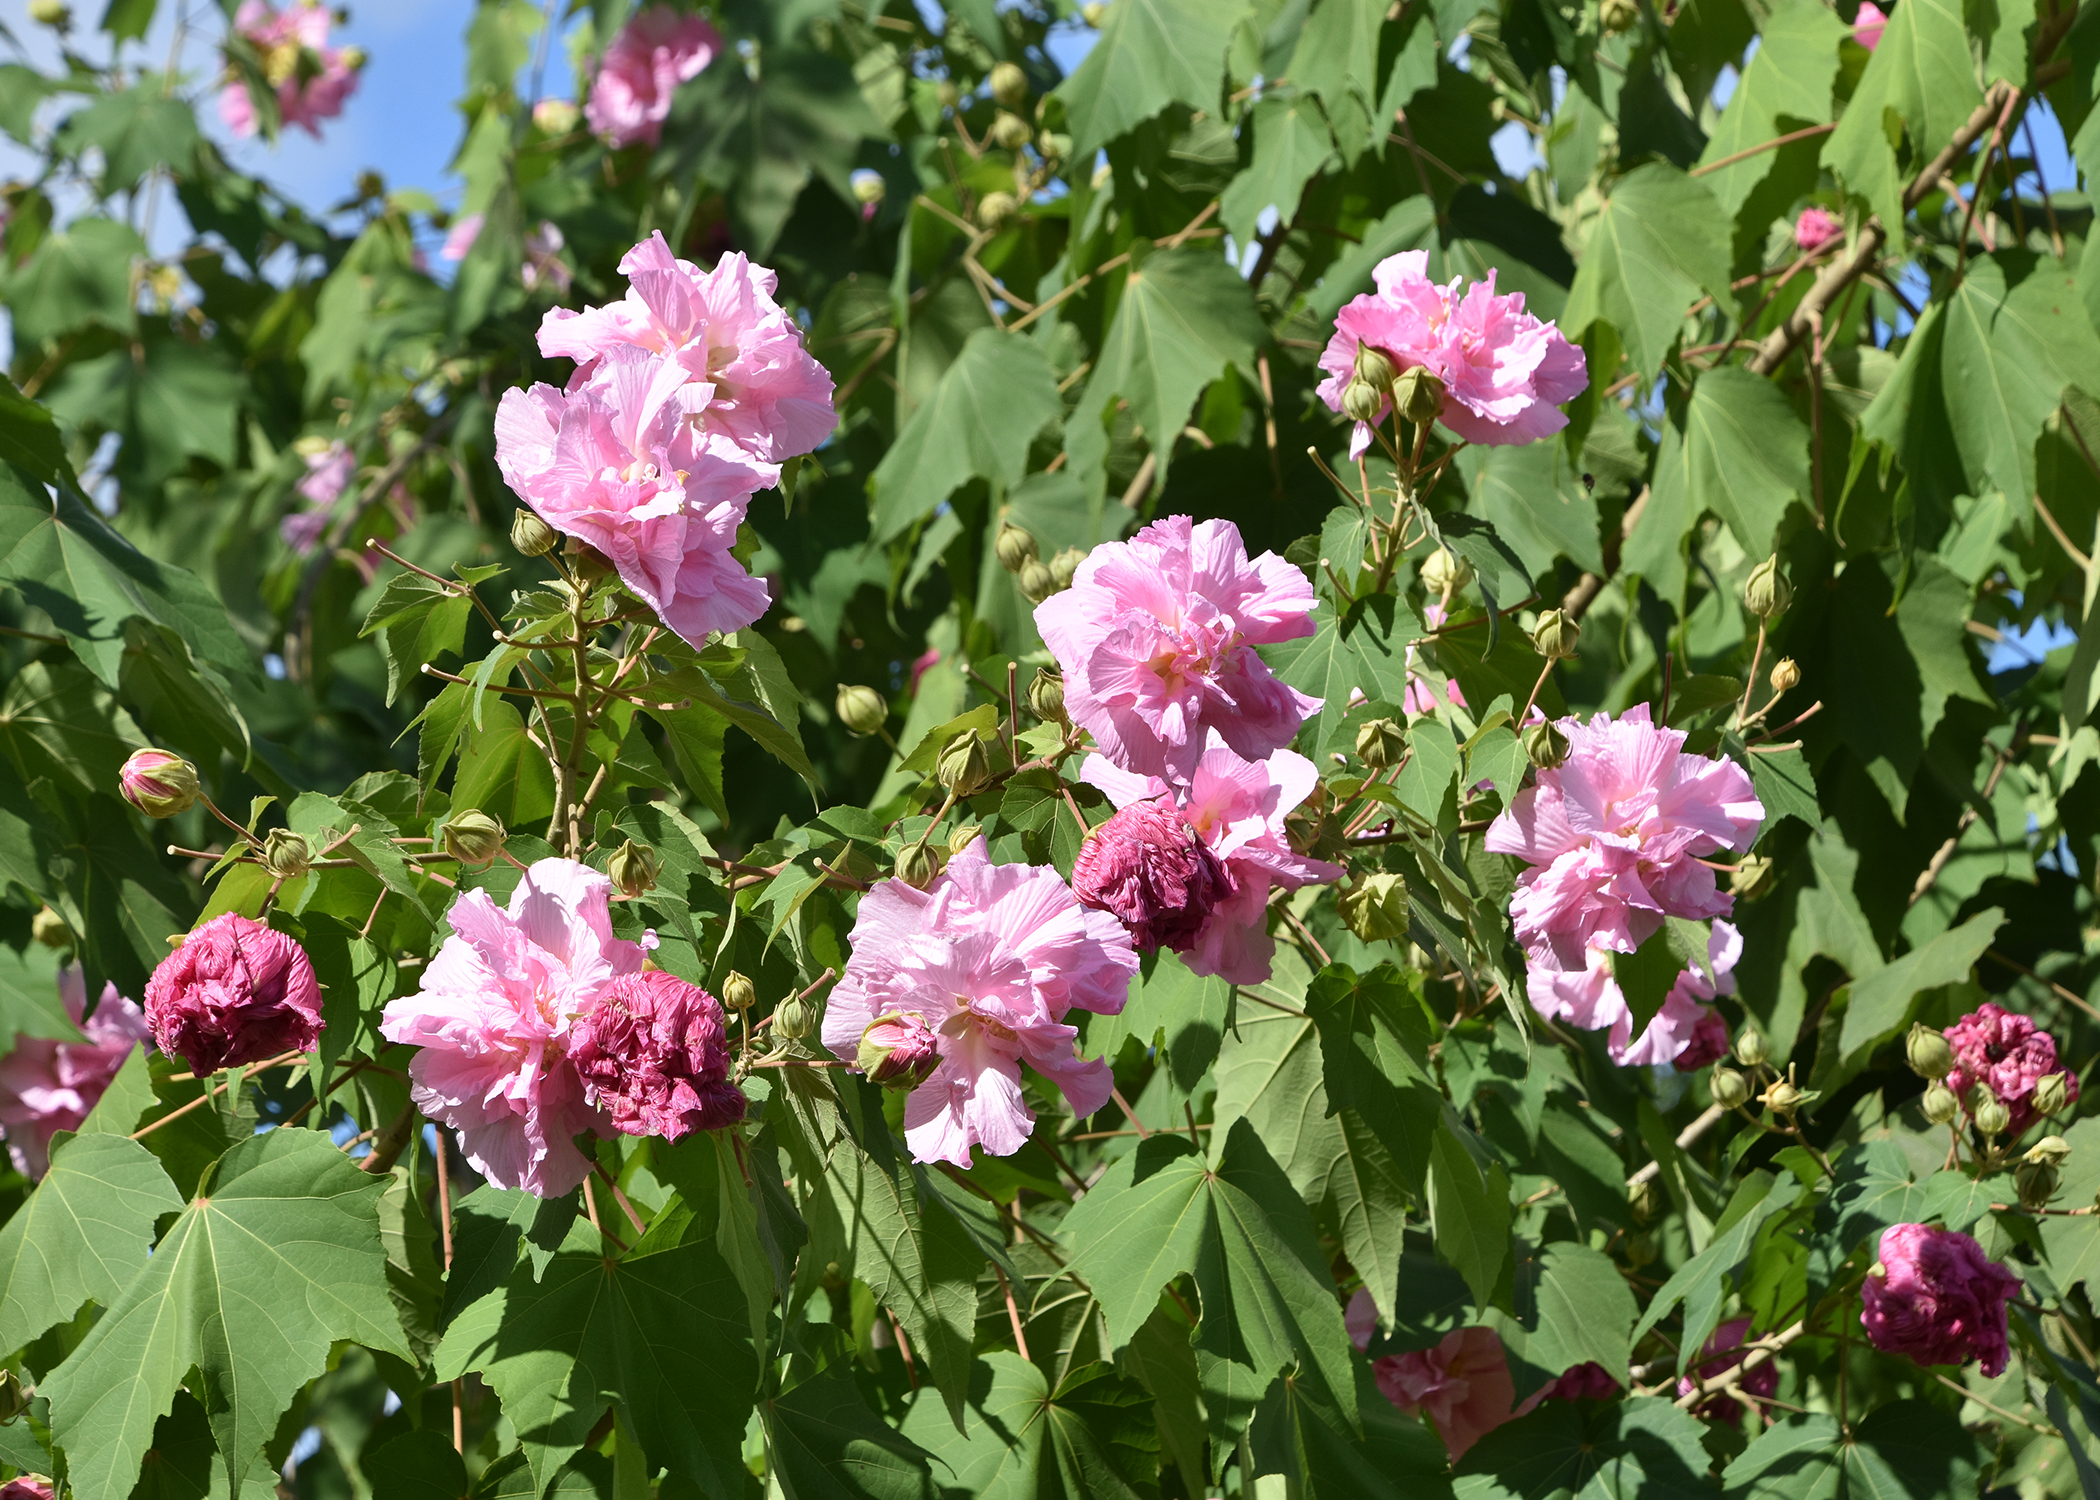 Confederate Rose produces hundreds of blooms per plant in its prime blooming season of late summer and fall. As the older flowers fade, new ones open. (Photo by MSU Extension/Gary Bachman)